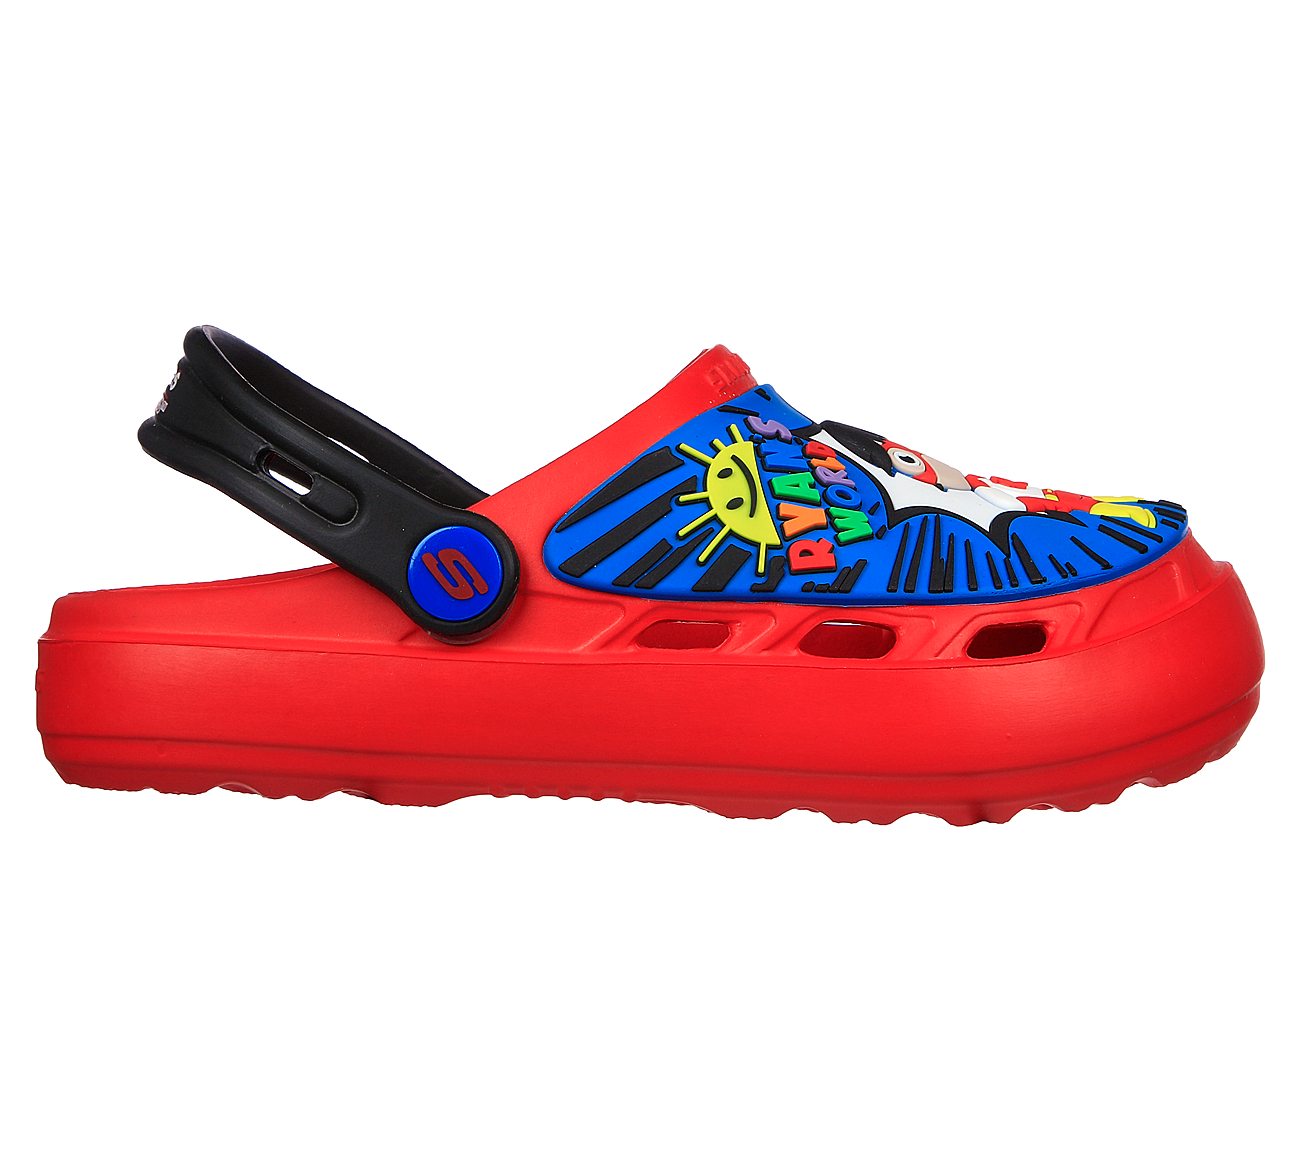 SWIFTERS - EXTRAORDINARY FUN, RED/BLUE Footwear Lateral View